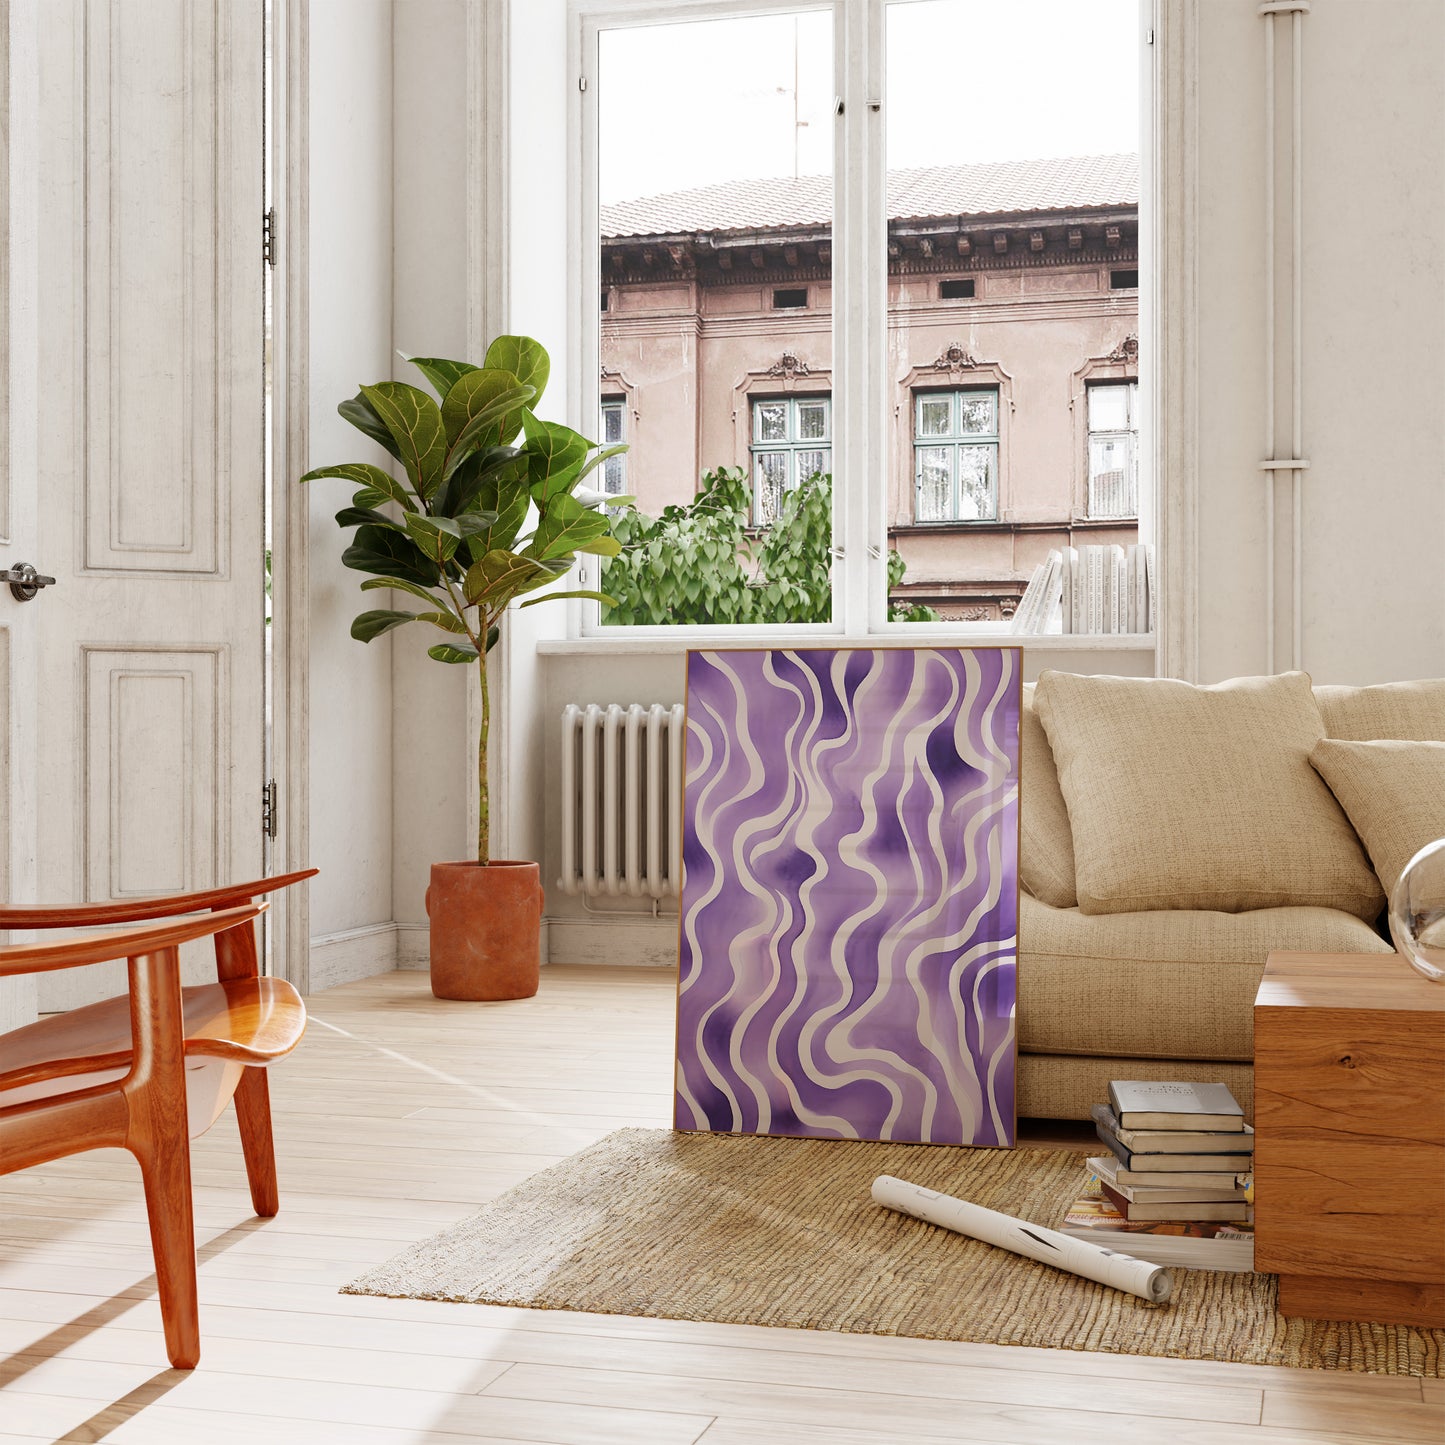 A cozy living room with a sofa, plants, and a colorful abstract painting leaning against the wall.